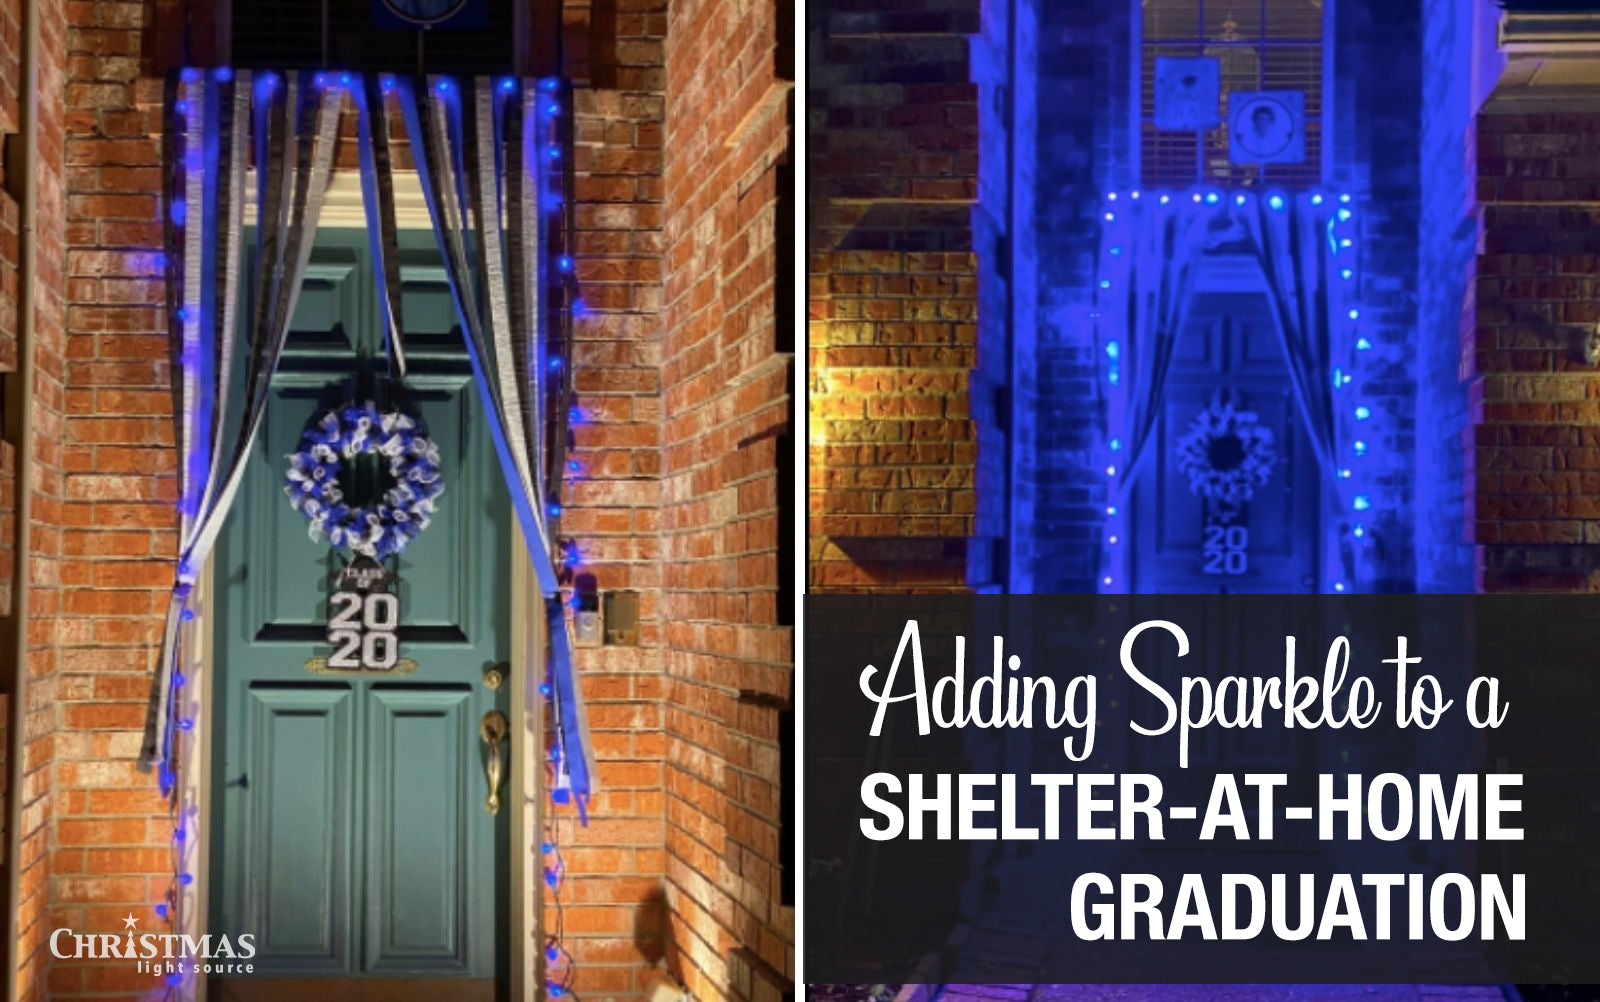 Adding Sparkle to a Shelter-at-Home High School Graduation